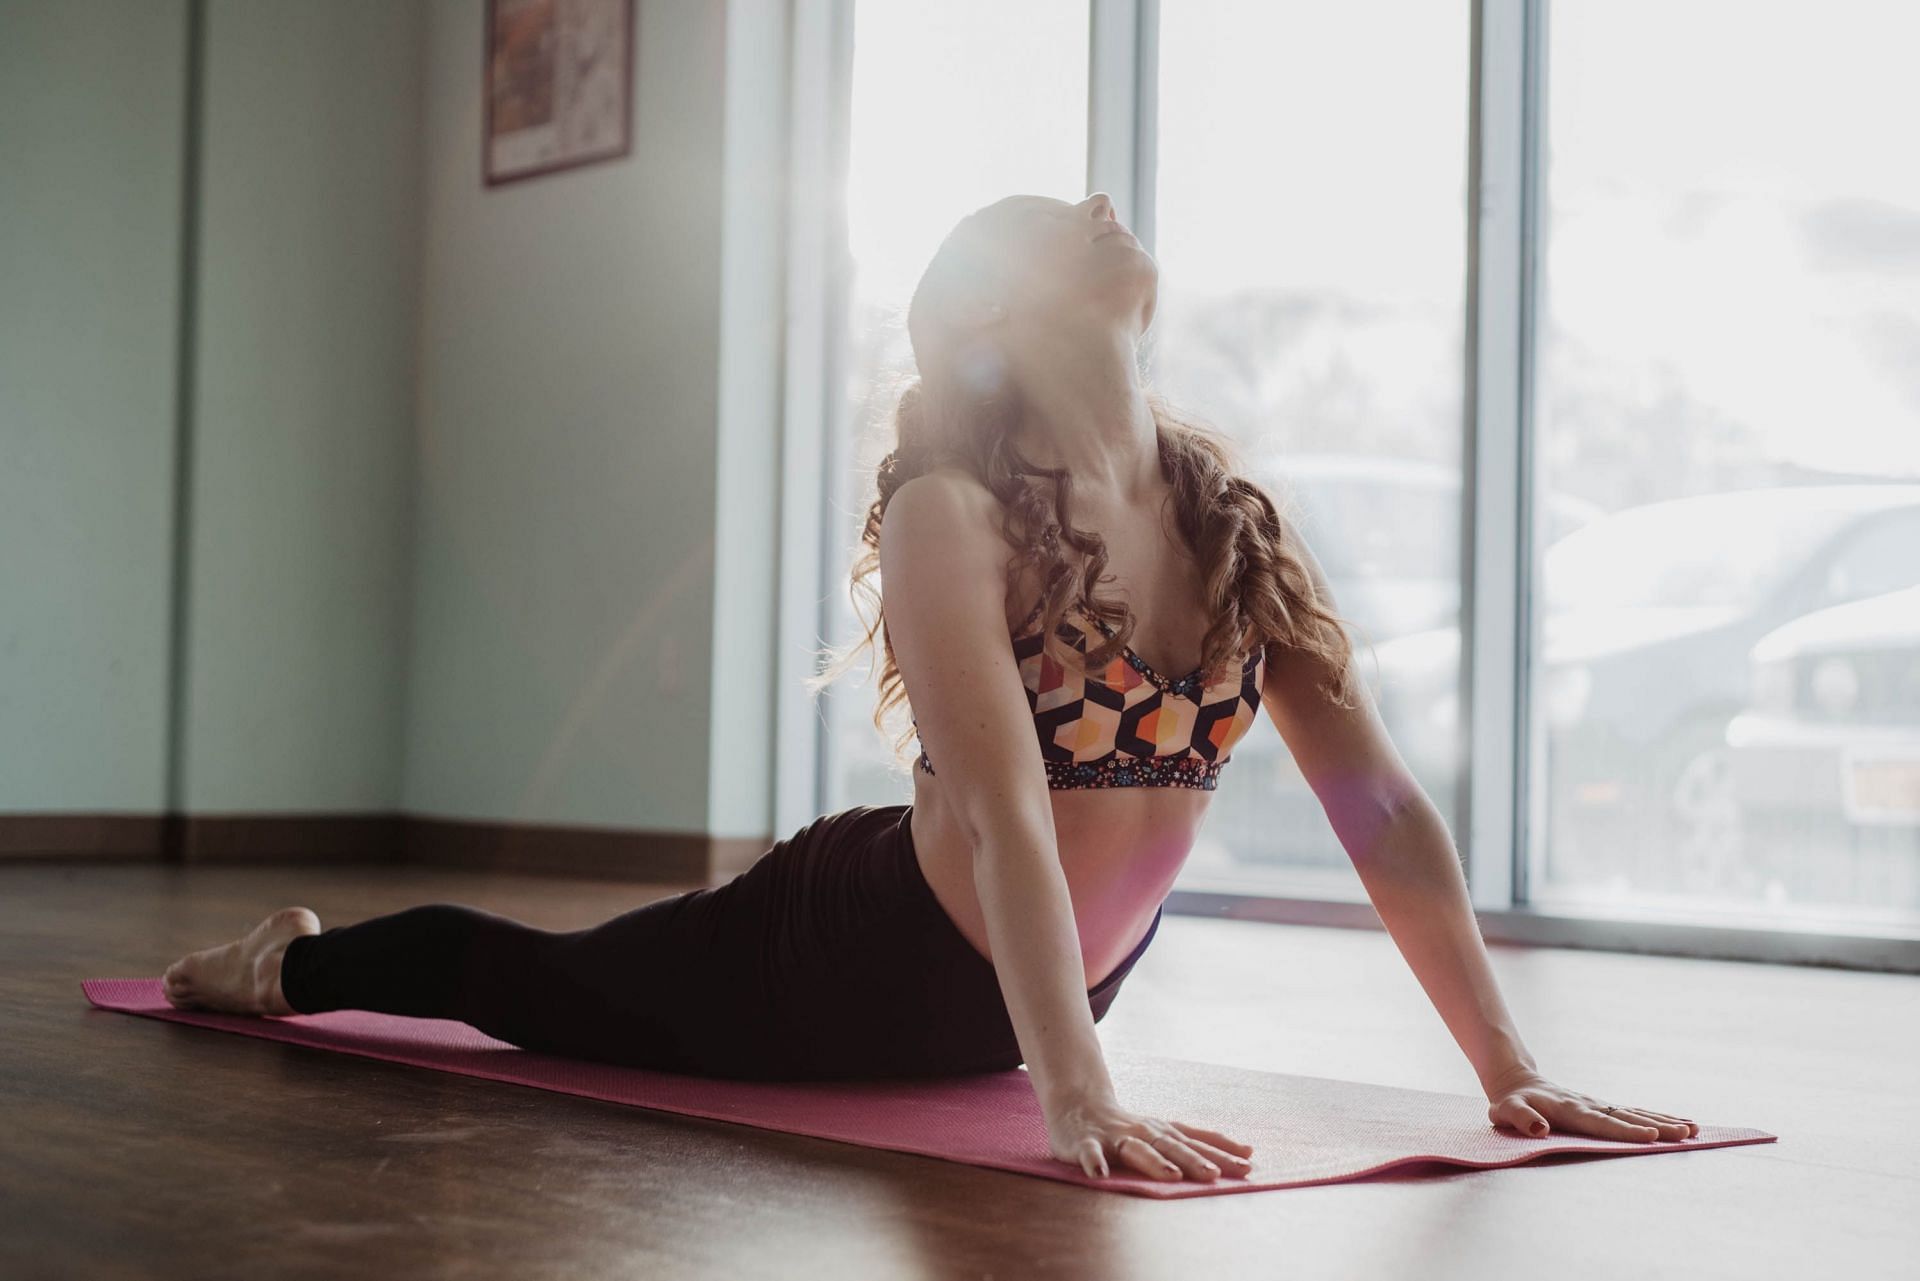 Yoga is great fo your mind, and even greater for your back! (Image via unsplash/Olivia bauso)